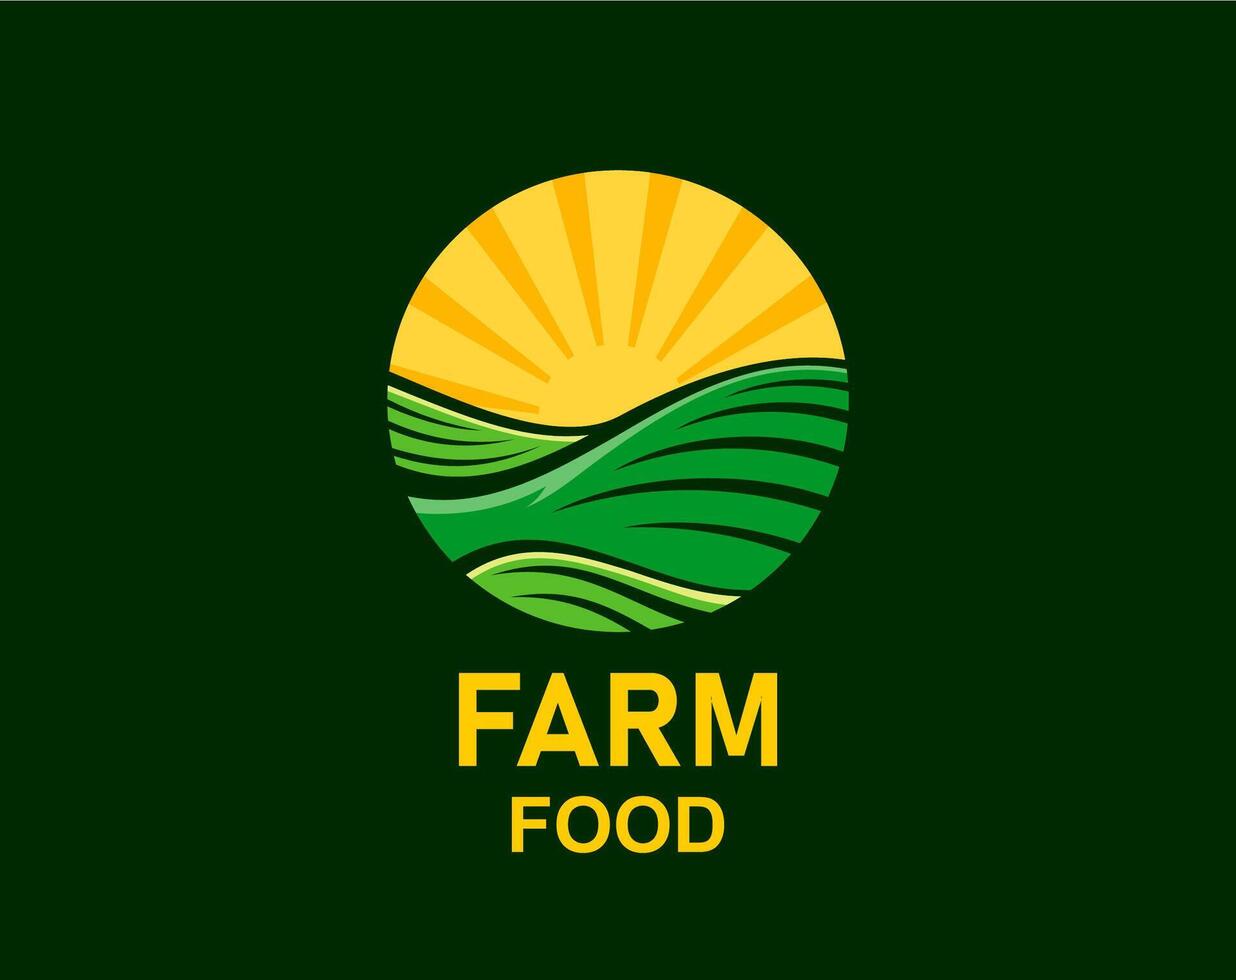 Agriculture rural farm food field icon or emblem vector